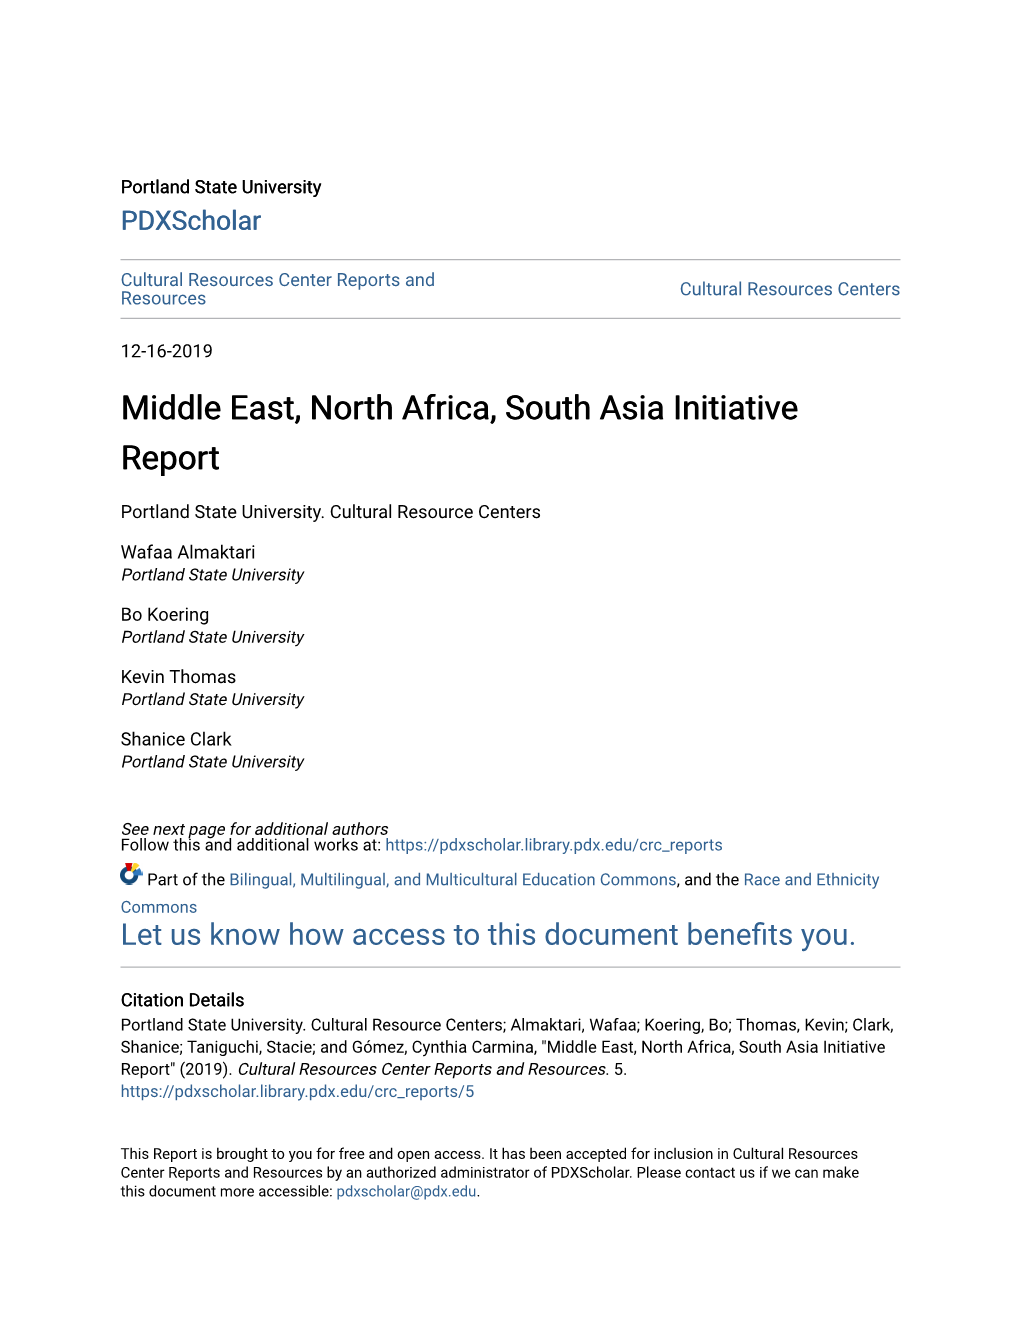 Middle East, North Africa, South Asia Initiative Report